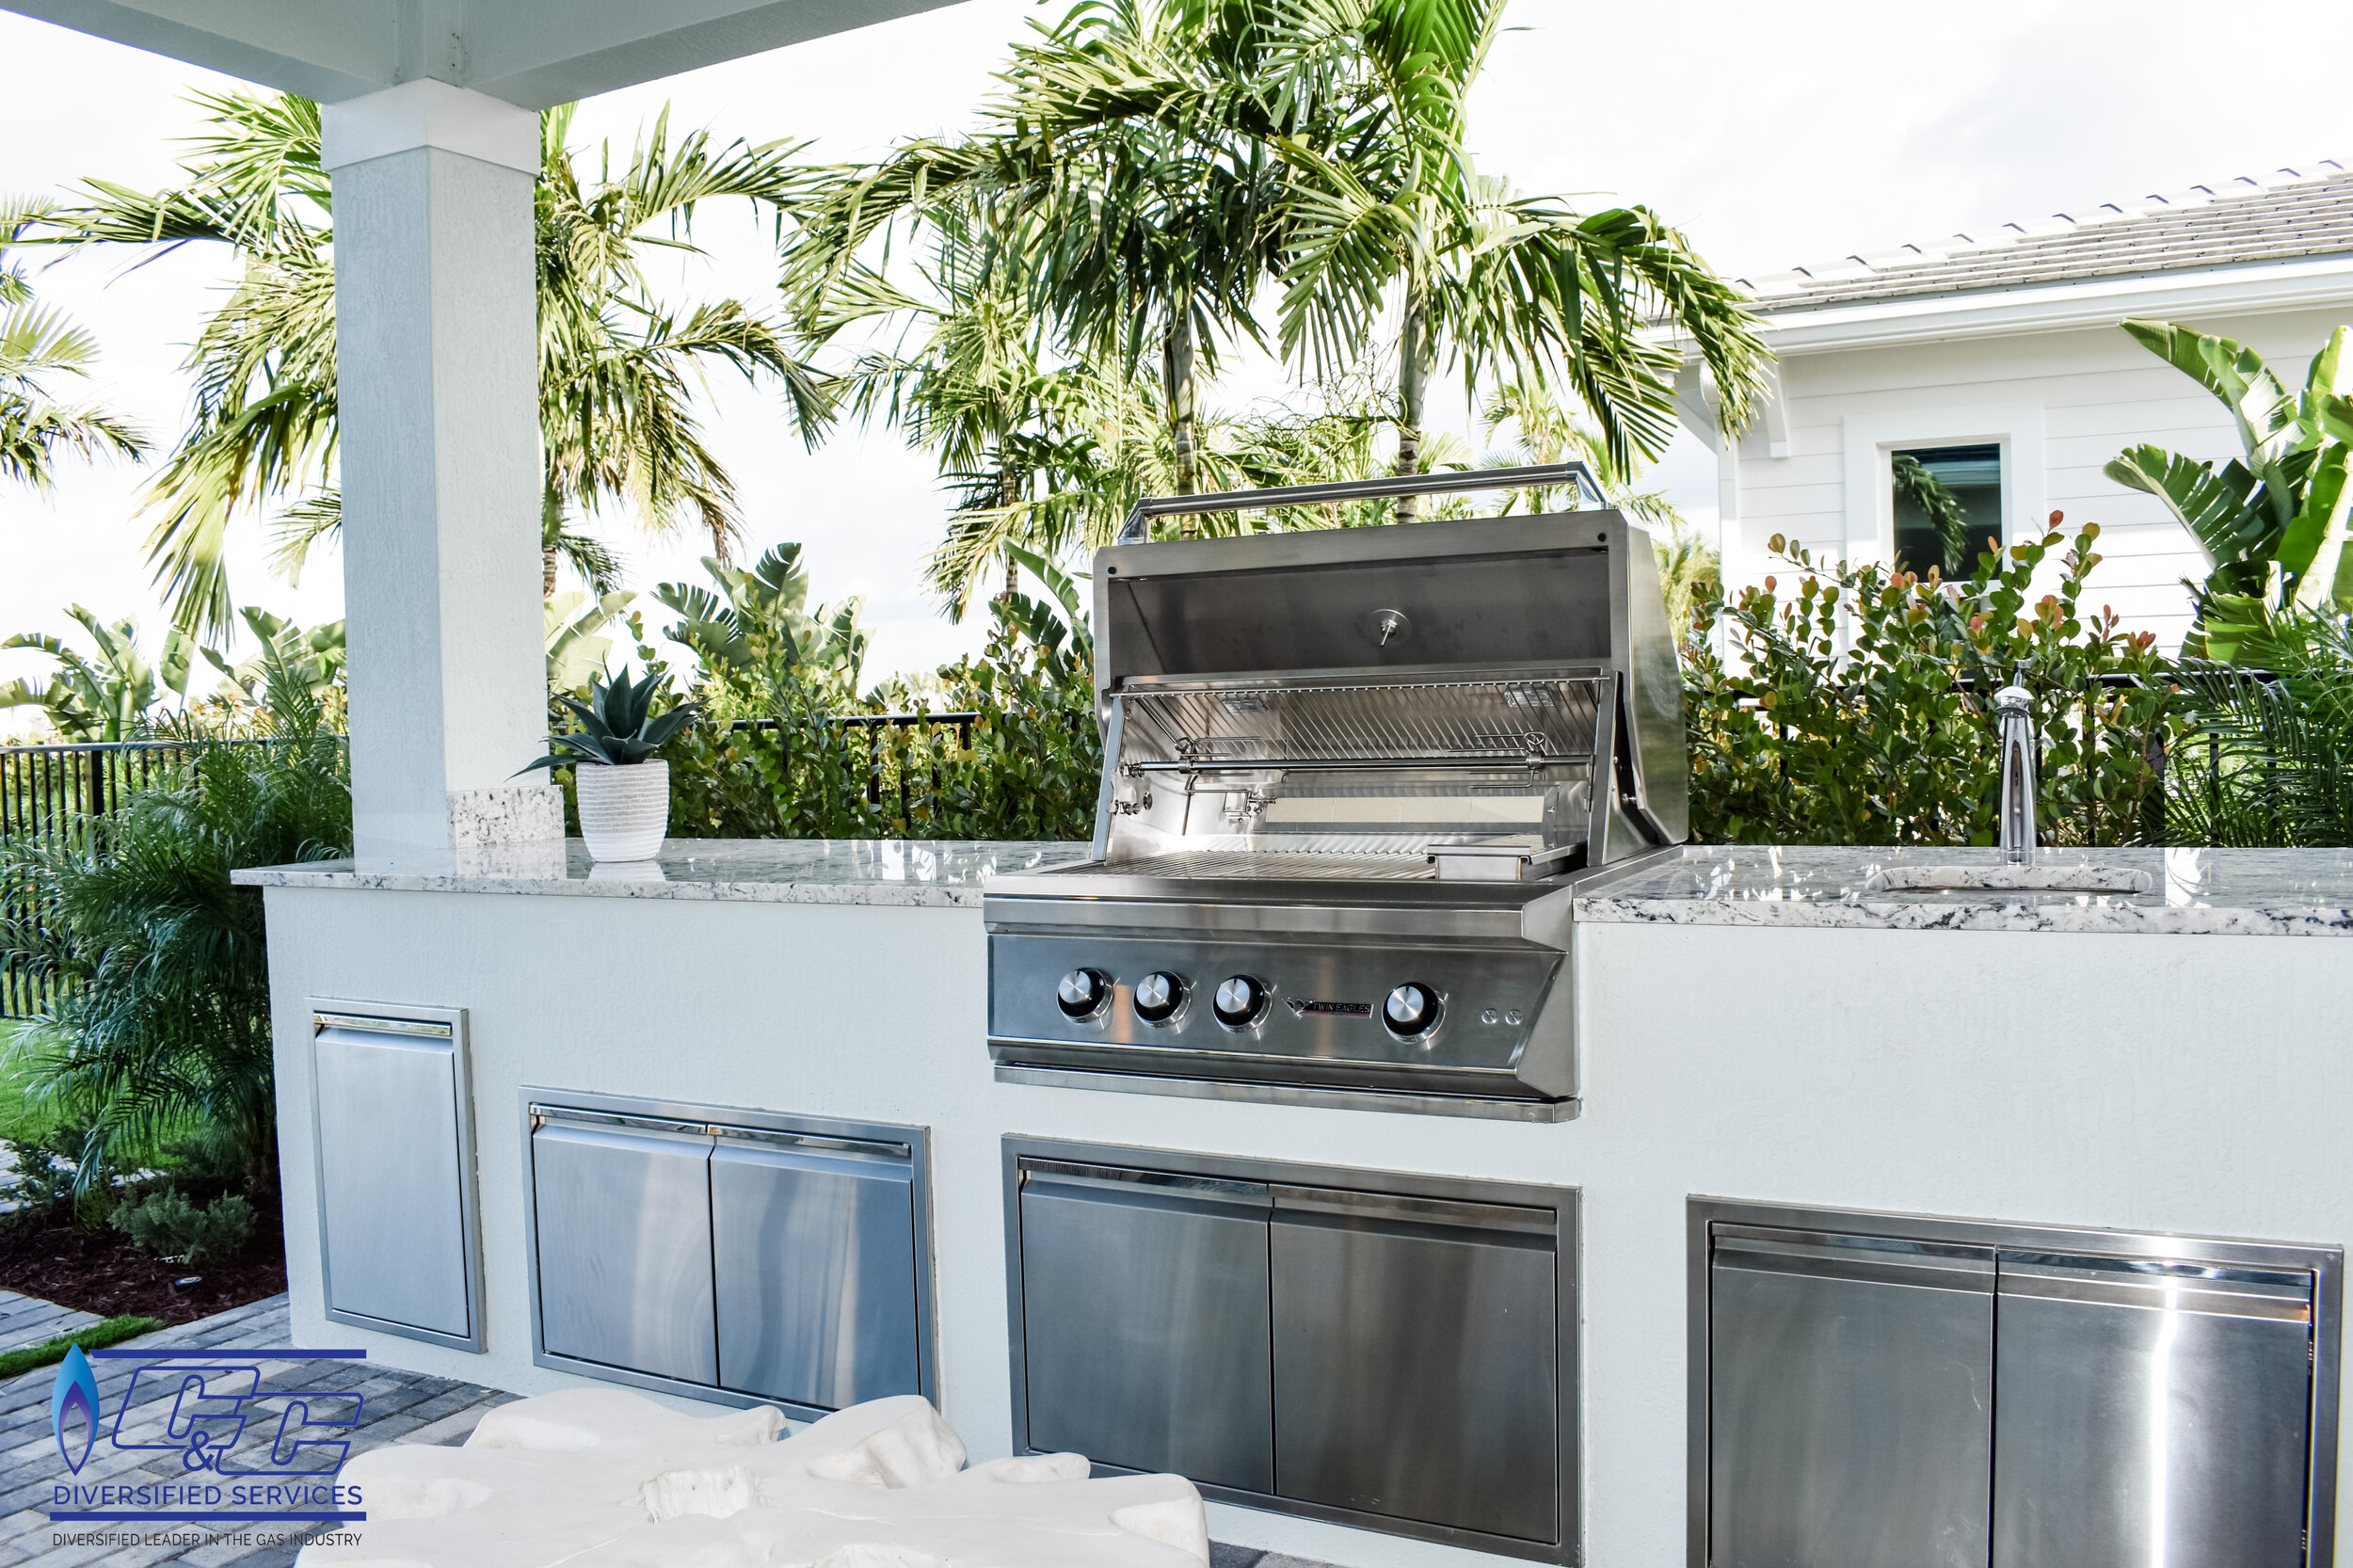 Outdoor Kitchens Jupiter Stuart And Surrounding Areas C C Diversified Services Gas Specialists In Martin And Palm Beach County